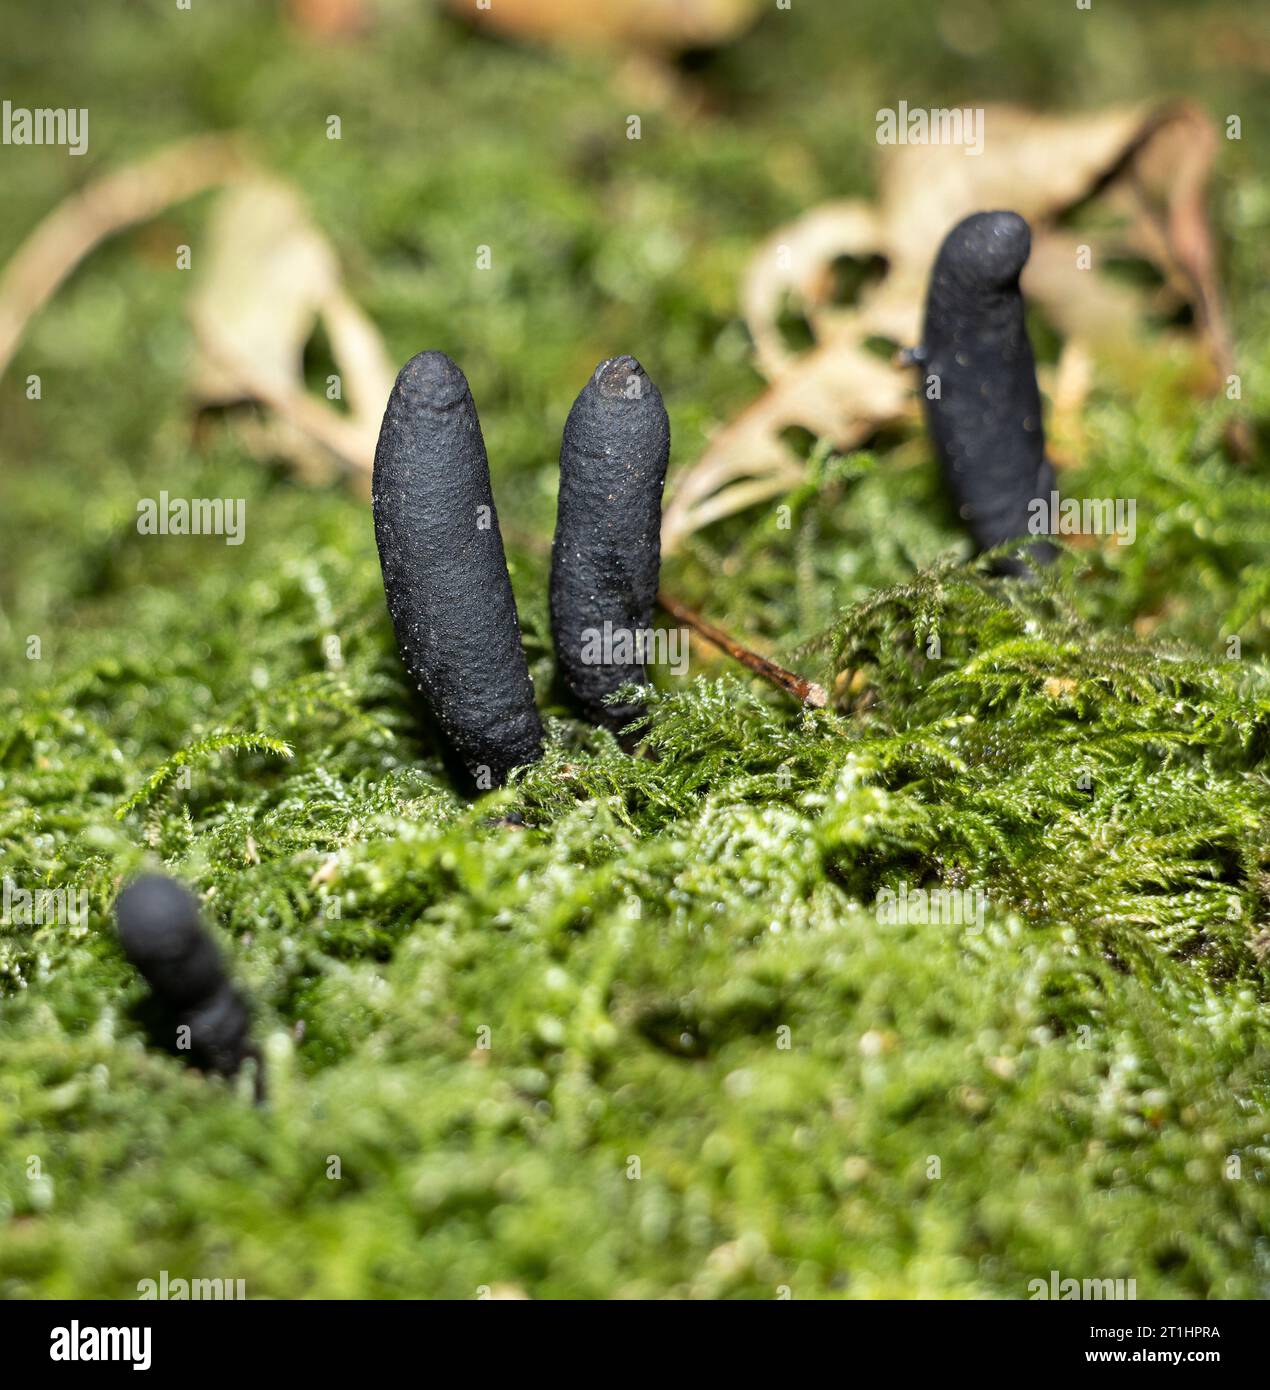 Flattened and club-shaped, the Black Earthtongue is a small relative of the deadly Ergot. They grow singly or in groups on moss and in grasslands. Stock Photo